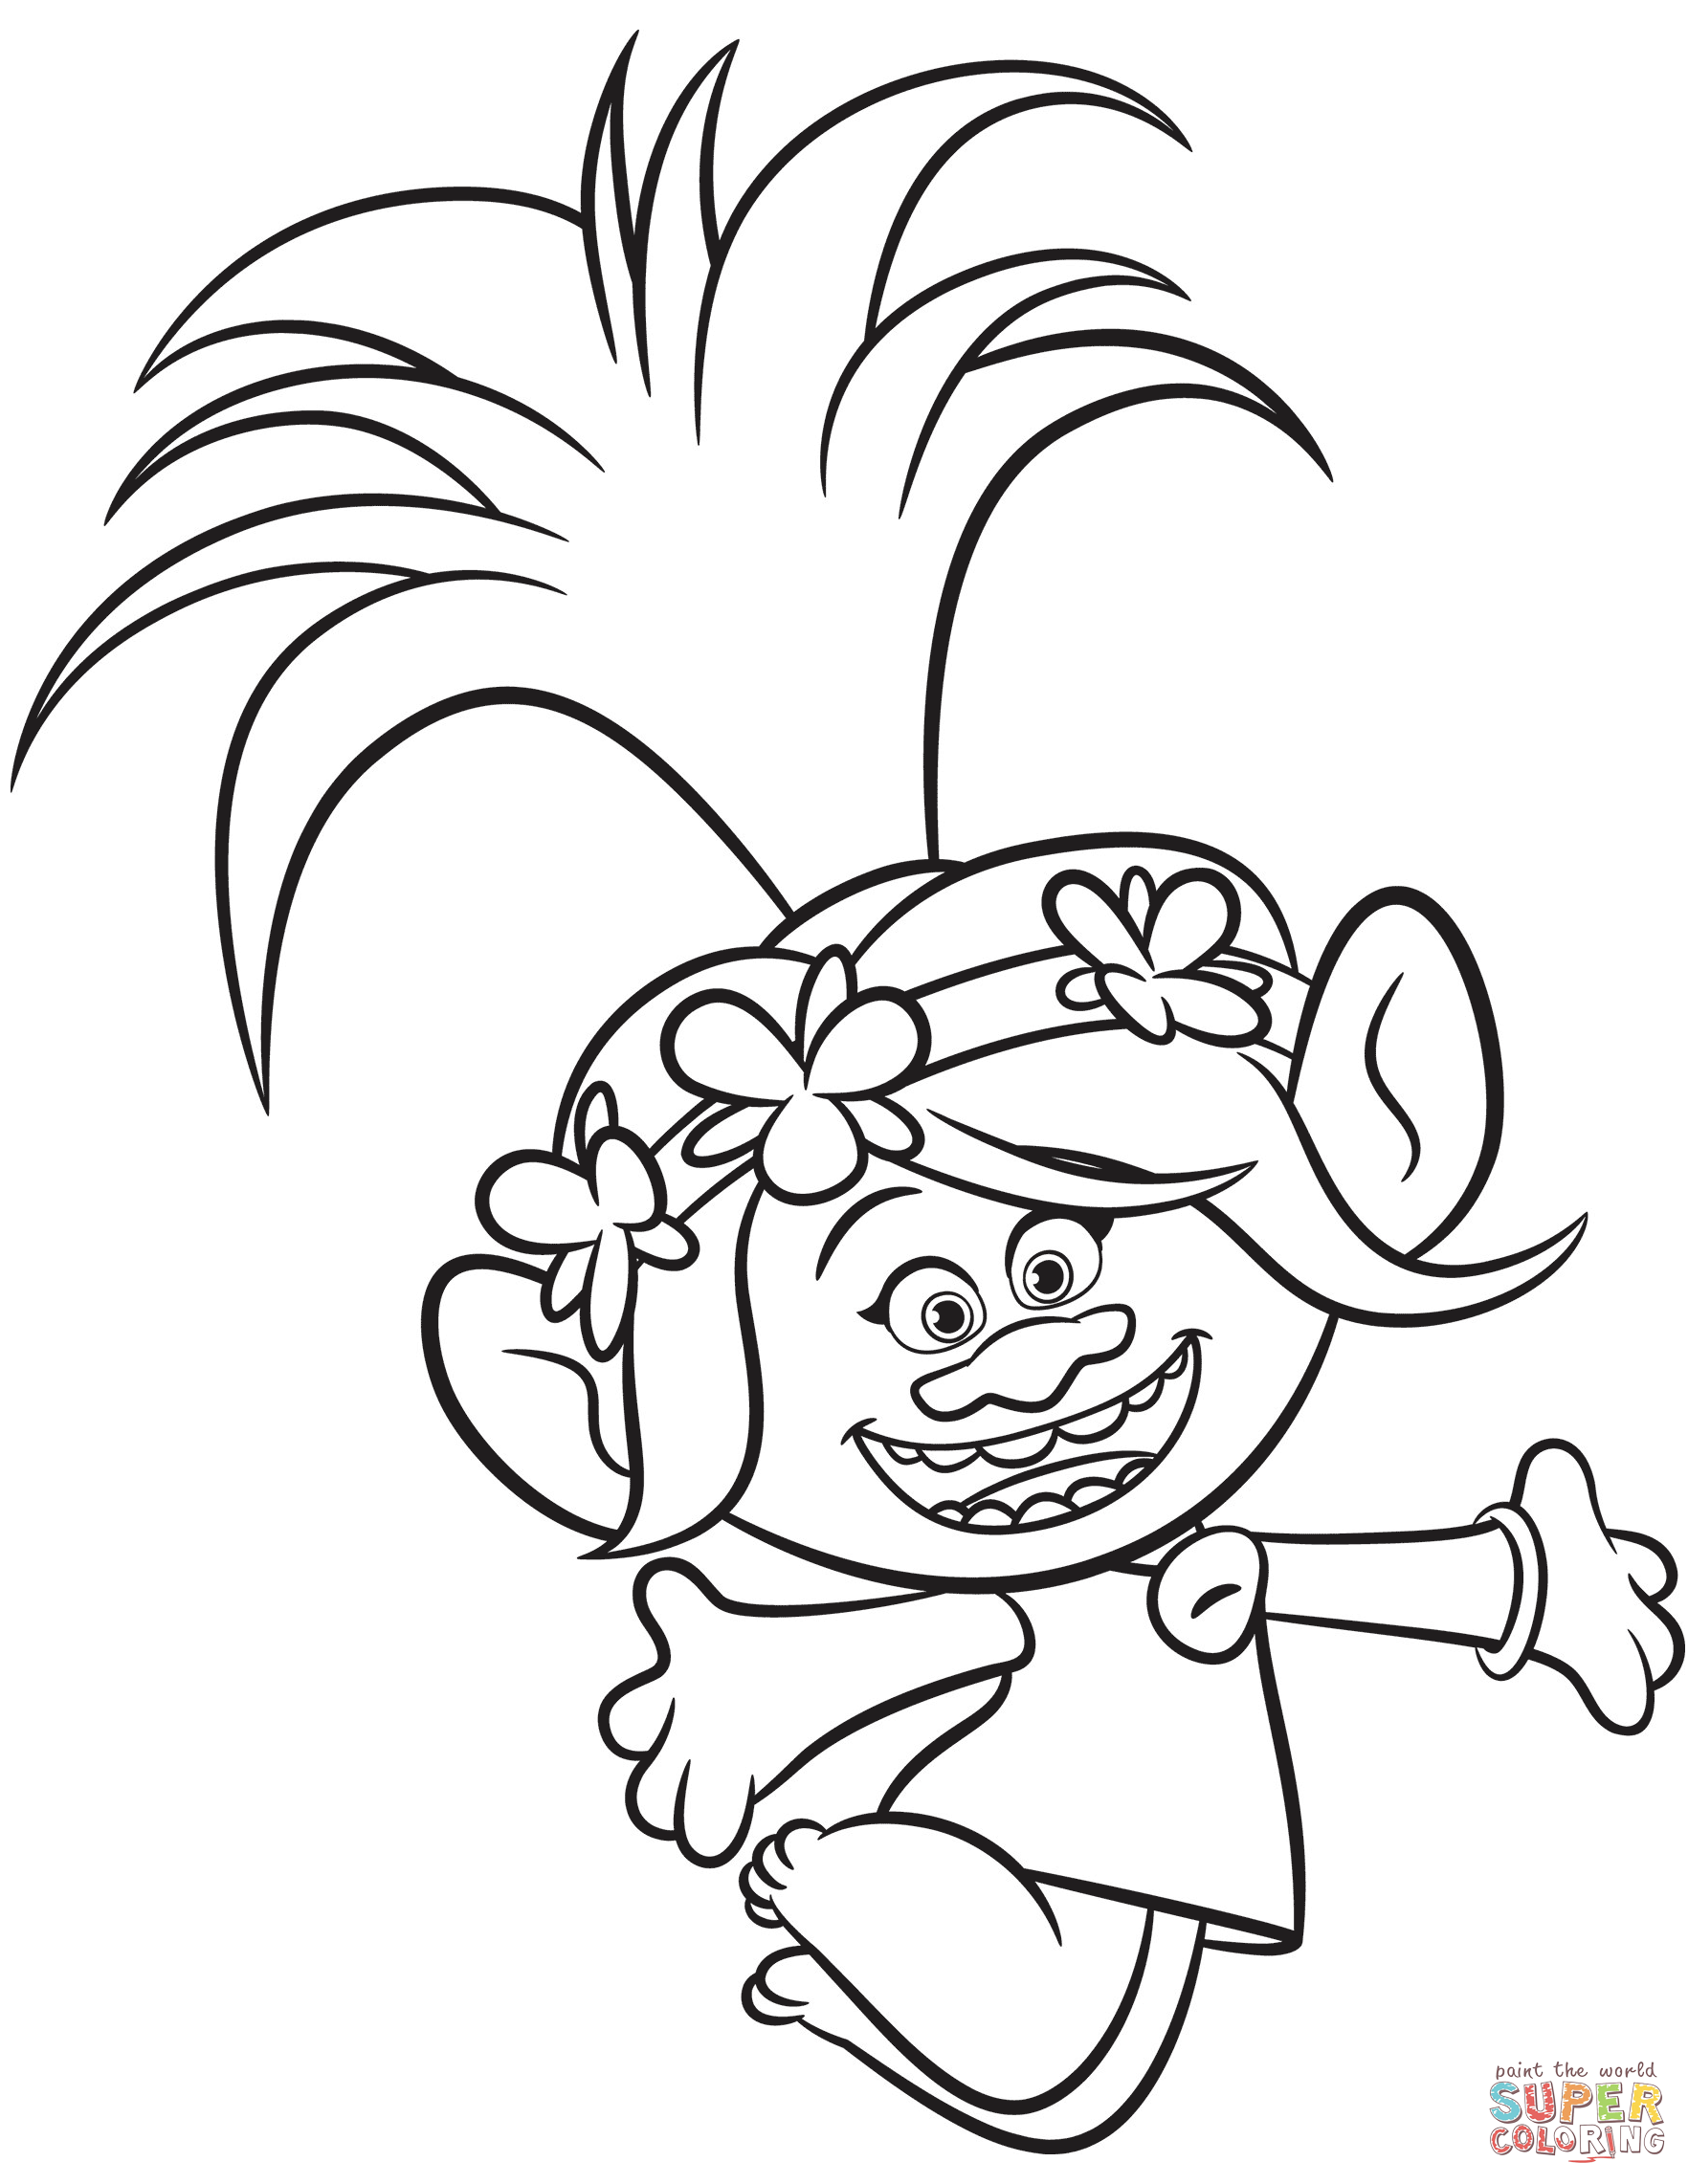 Poppy from Trolls coloring page | Free Printable Coloring Pages